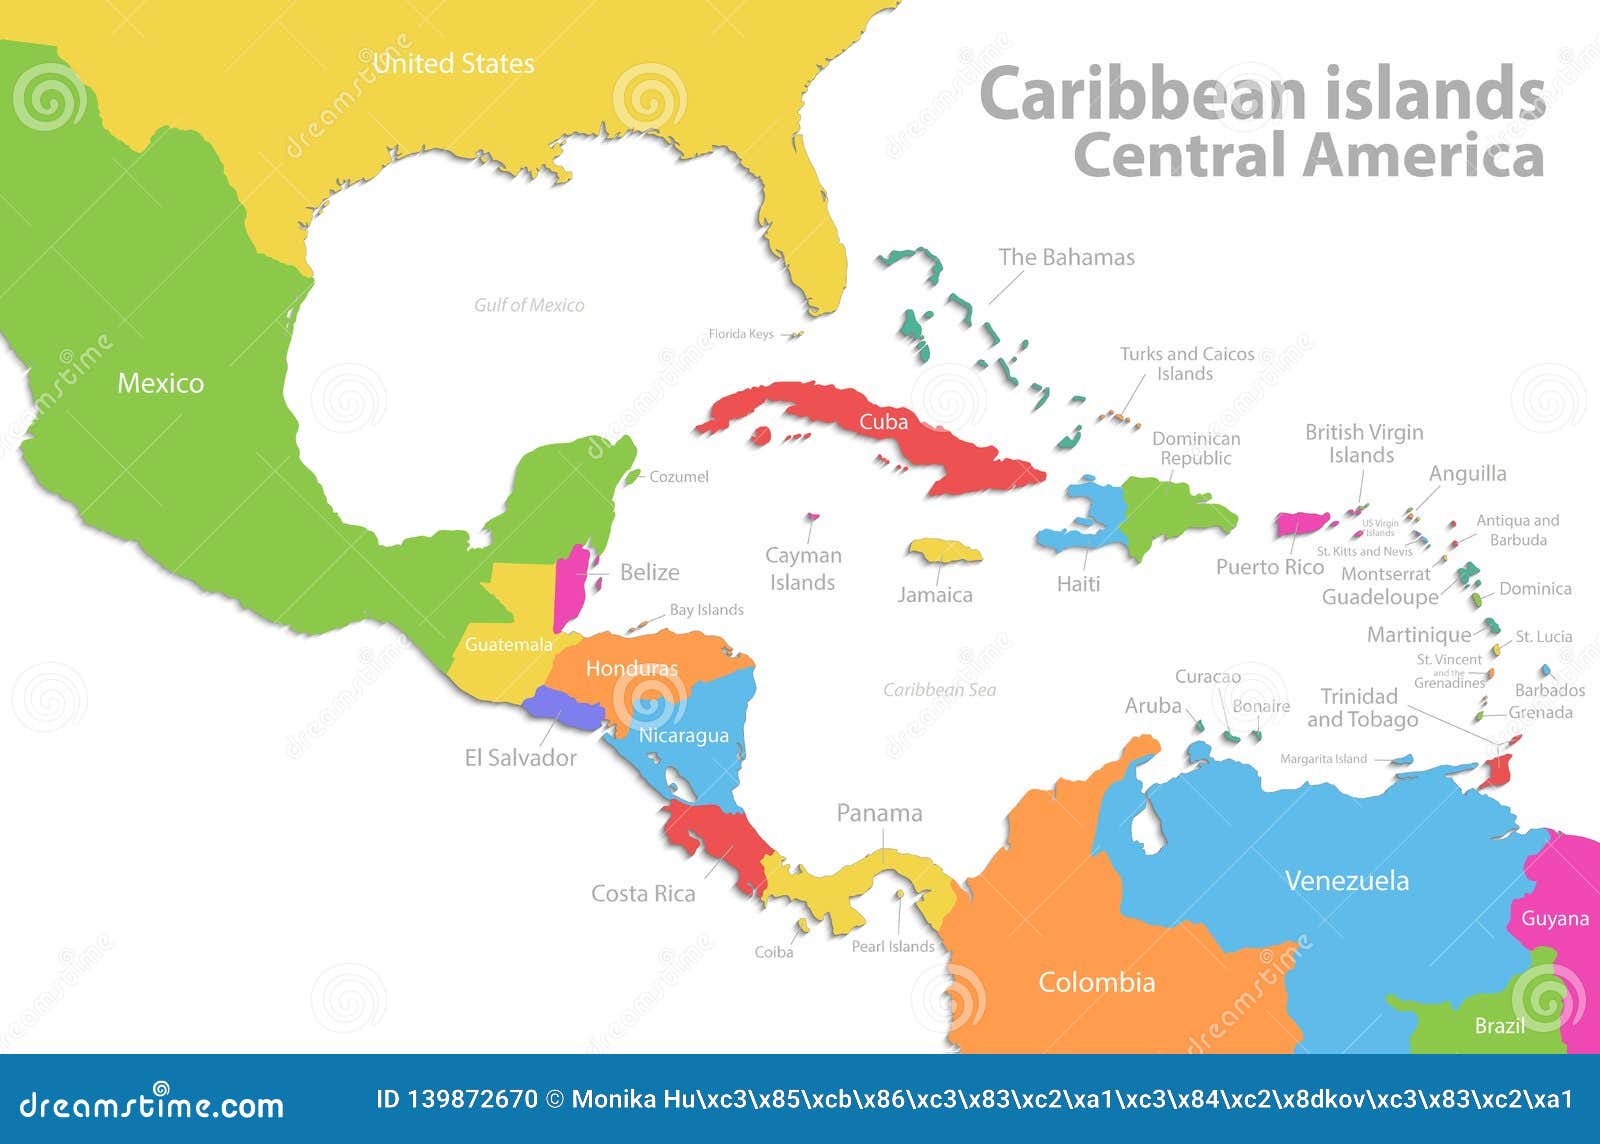 caribbean islands central america map, new political detailed map, separate individual states, with state names,  on white